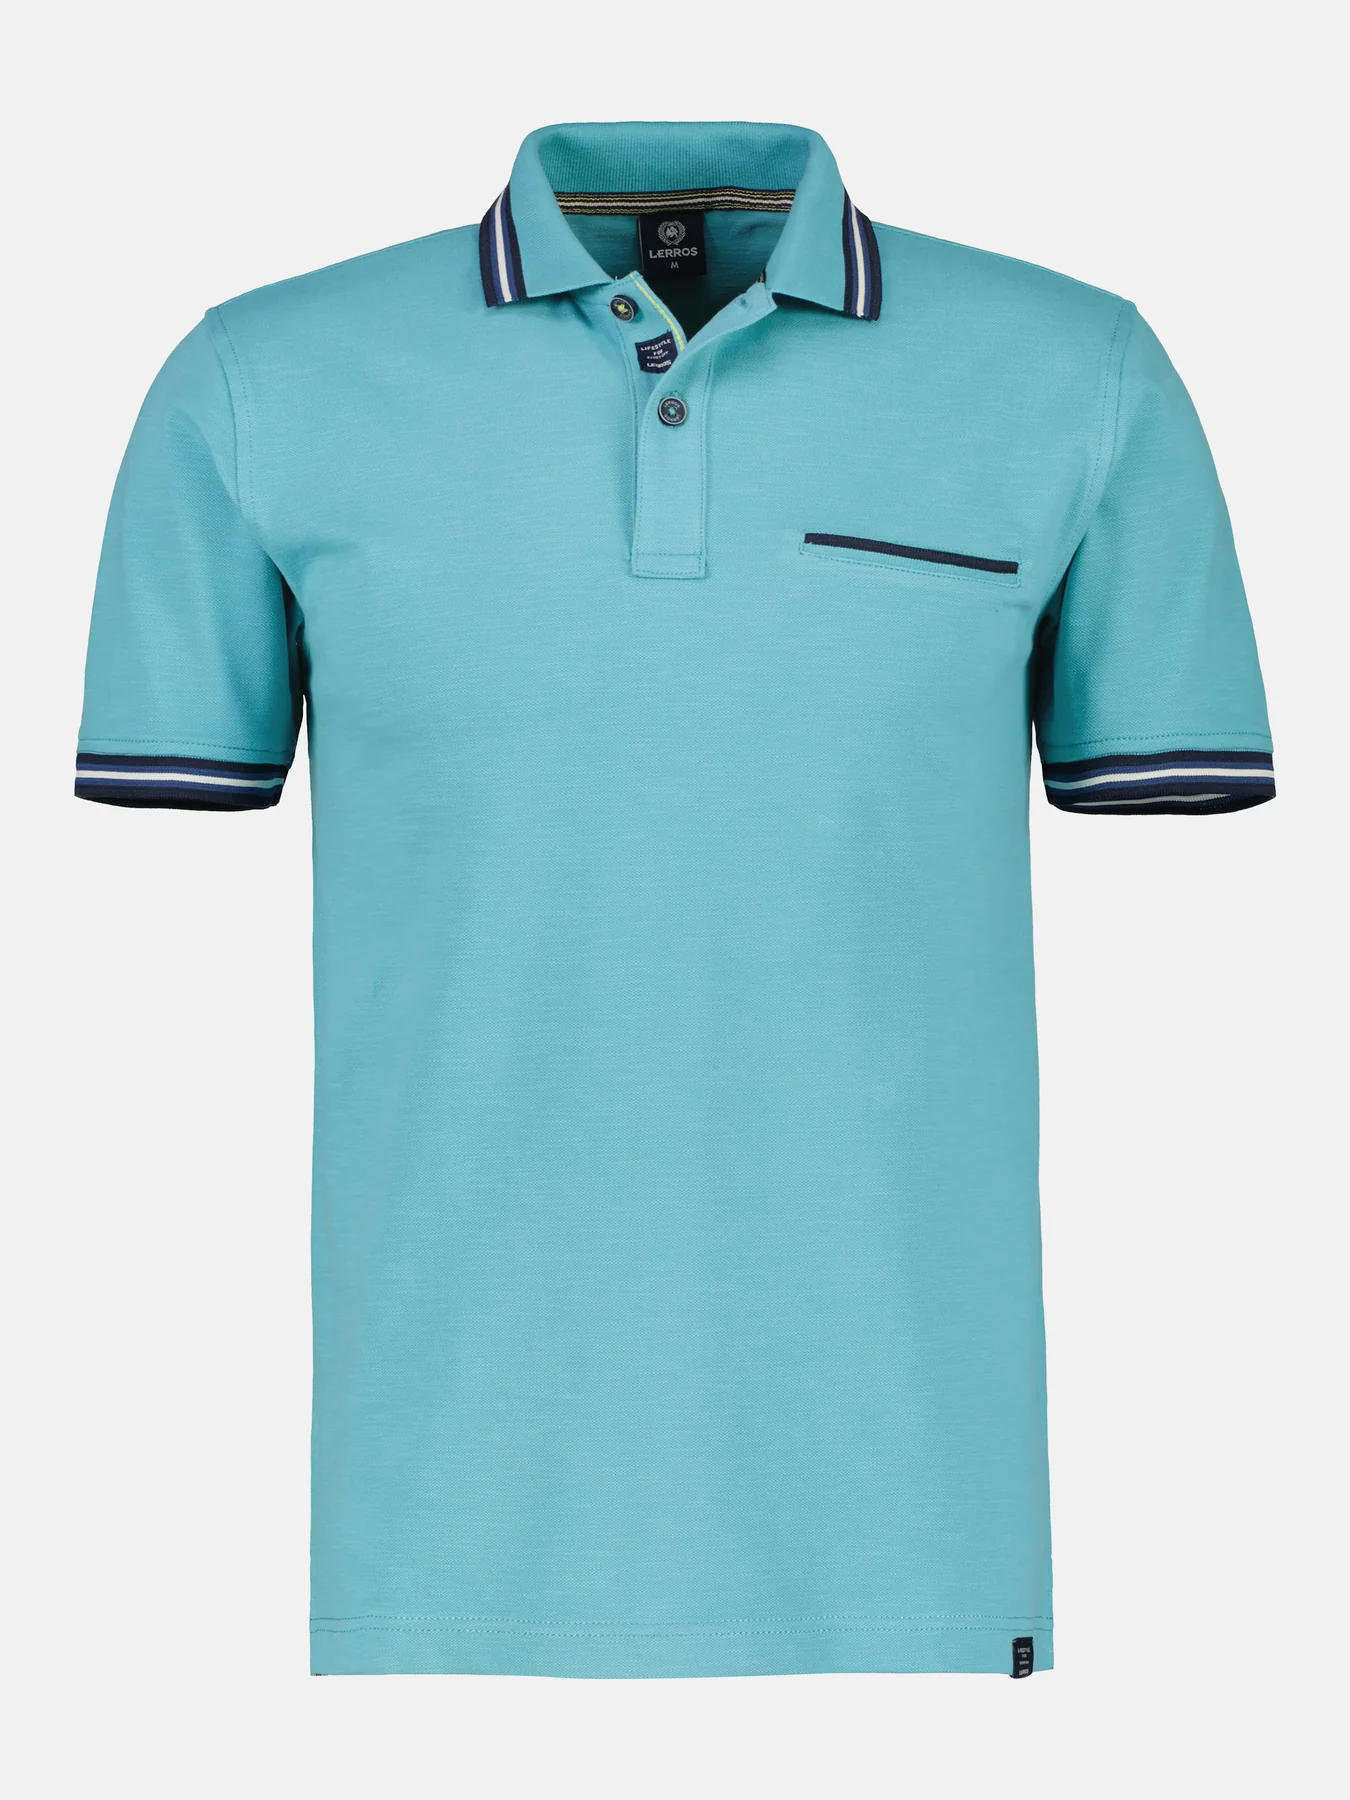 Poloshirt | Blues Structure Turquoise Light LERROS Cotton - - with